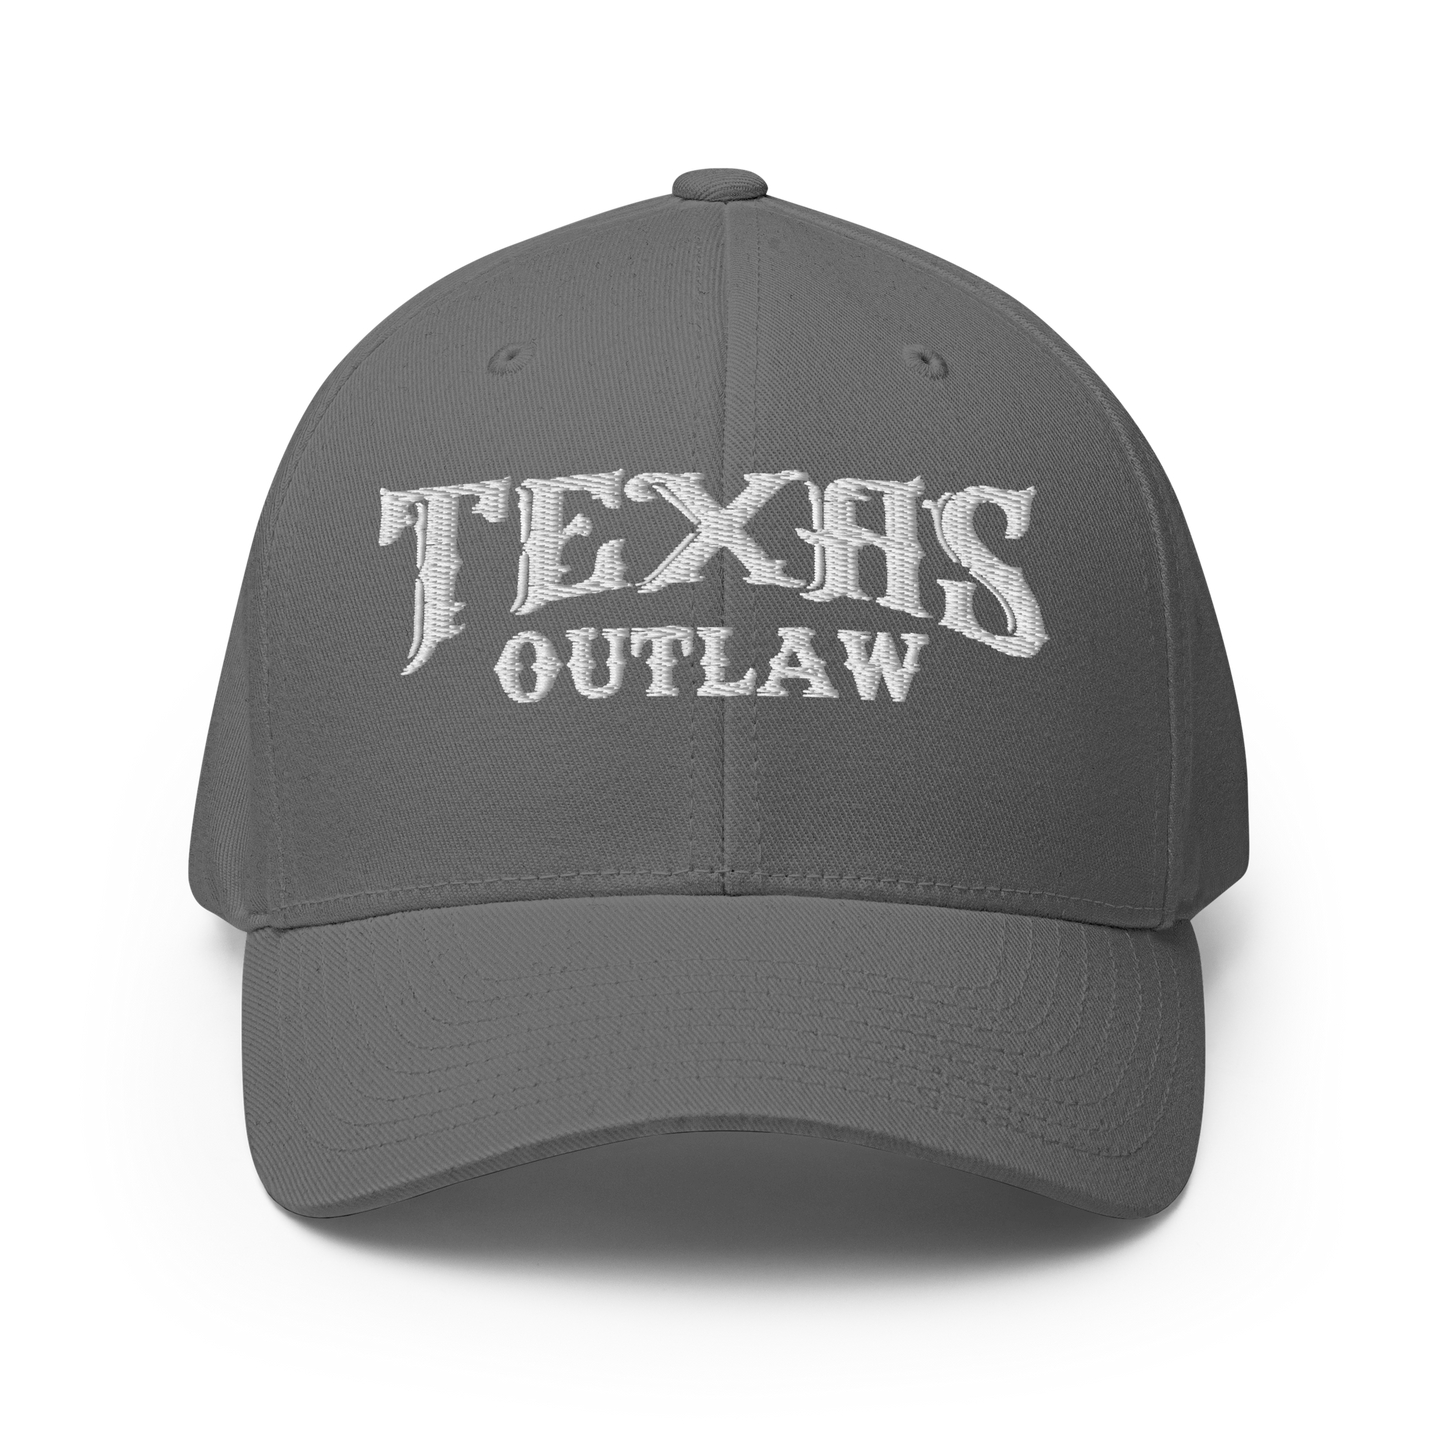 Texas Outlaw Closed-Back Structured Cap